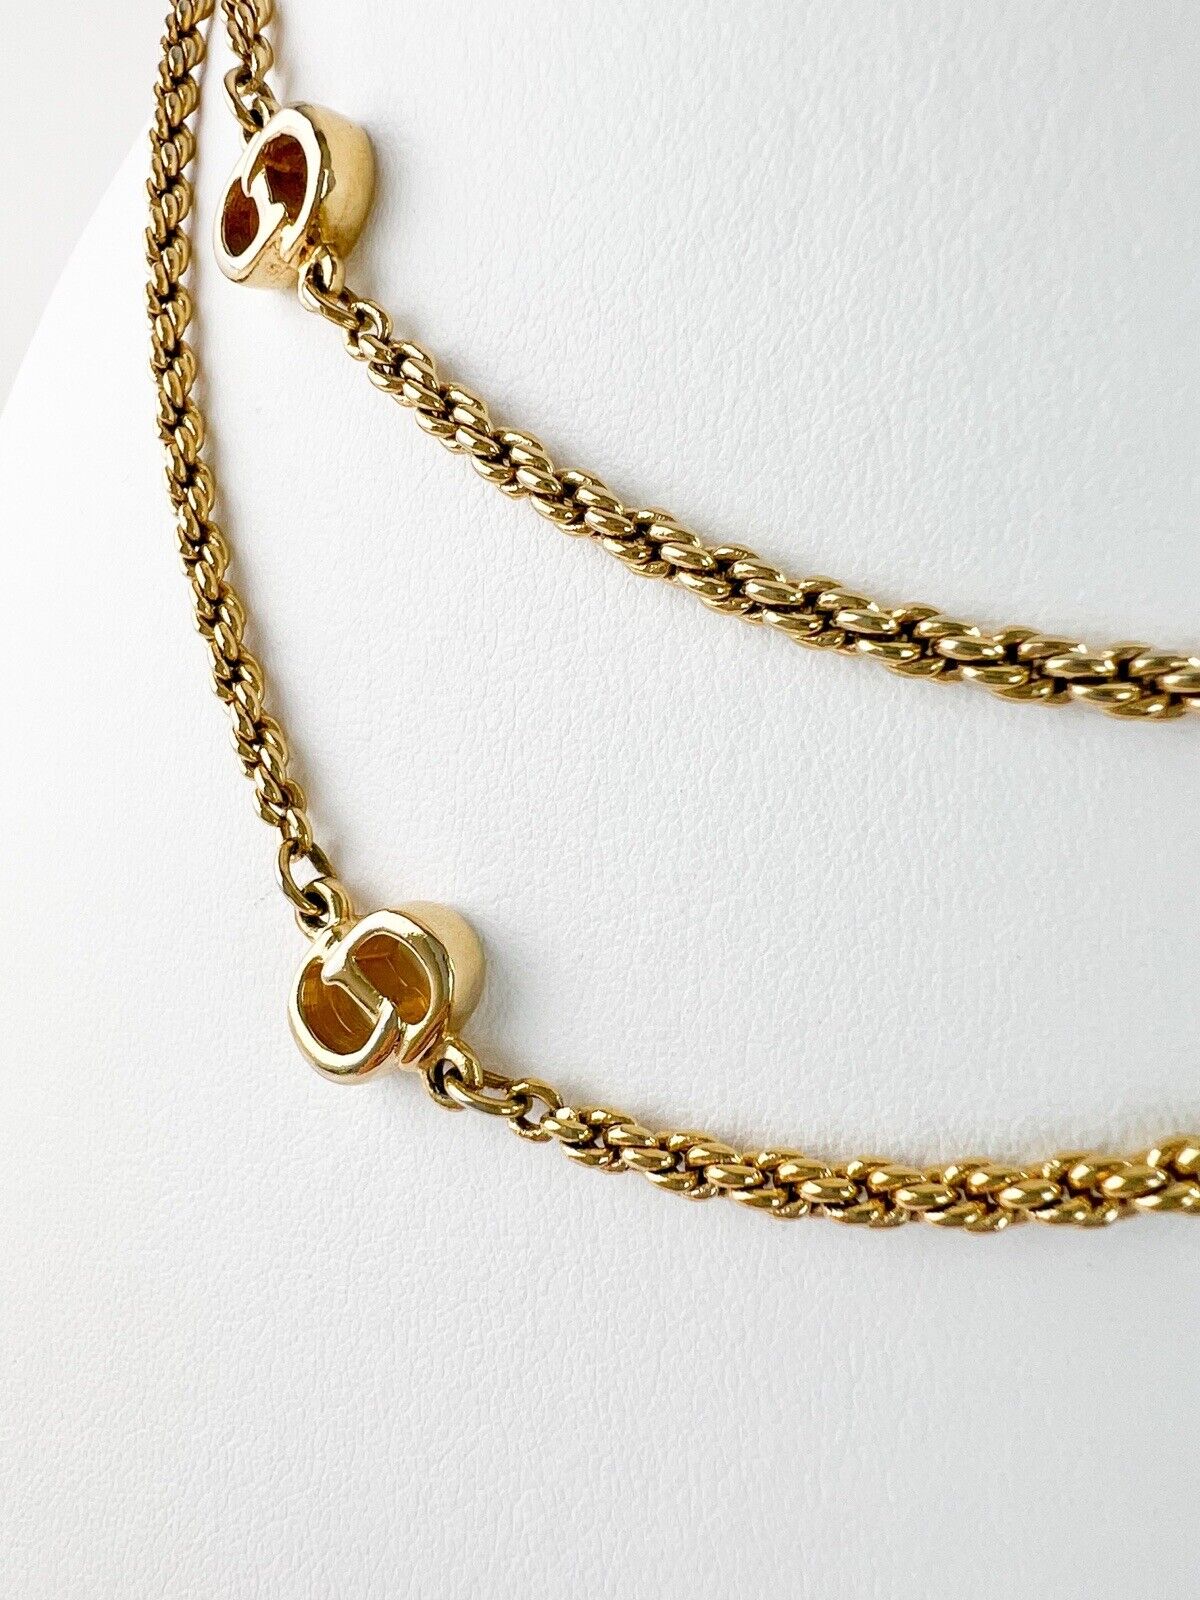 Vintage Christian Dior Necklace, Vintage Chain Necklace, Gold Tone Necklace, Vintage CD Logo Necklace, Jewelry for Women, Gift for her